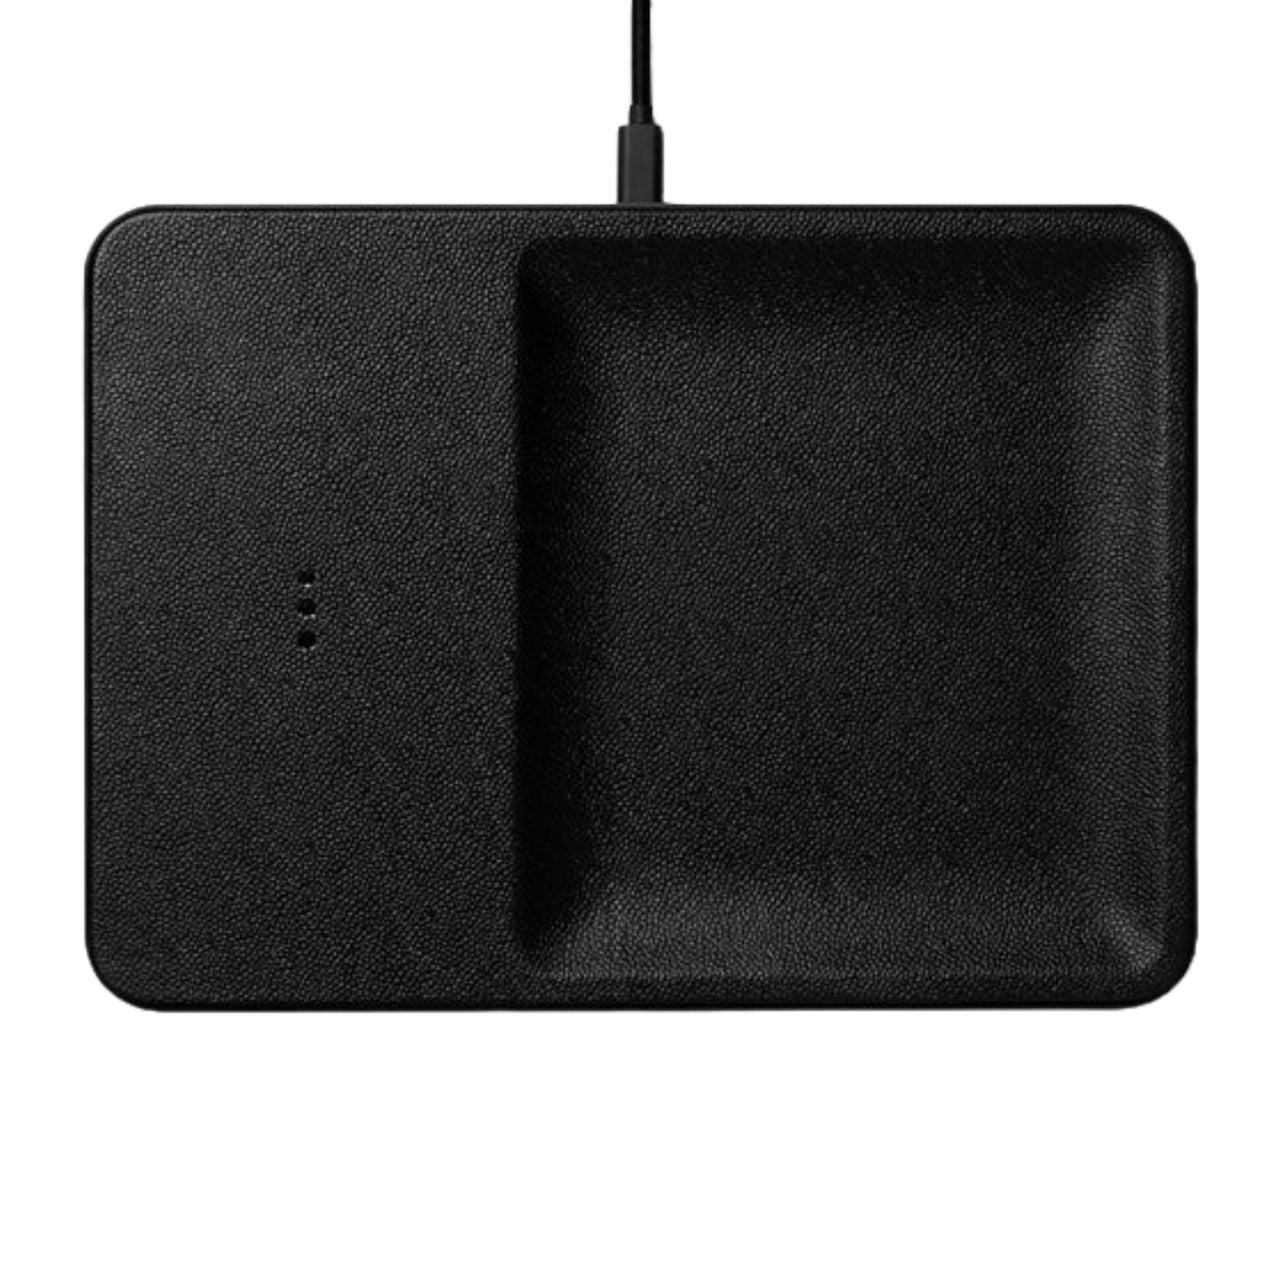 Catch 3 | Black Leather Wireless Charger with Valet Tray